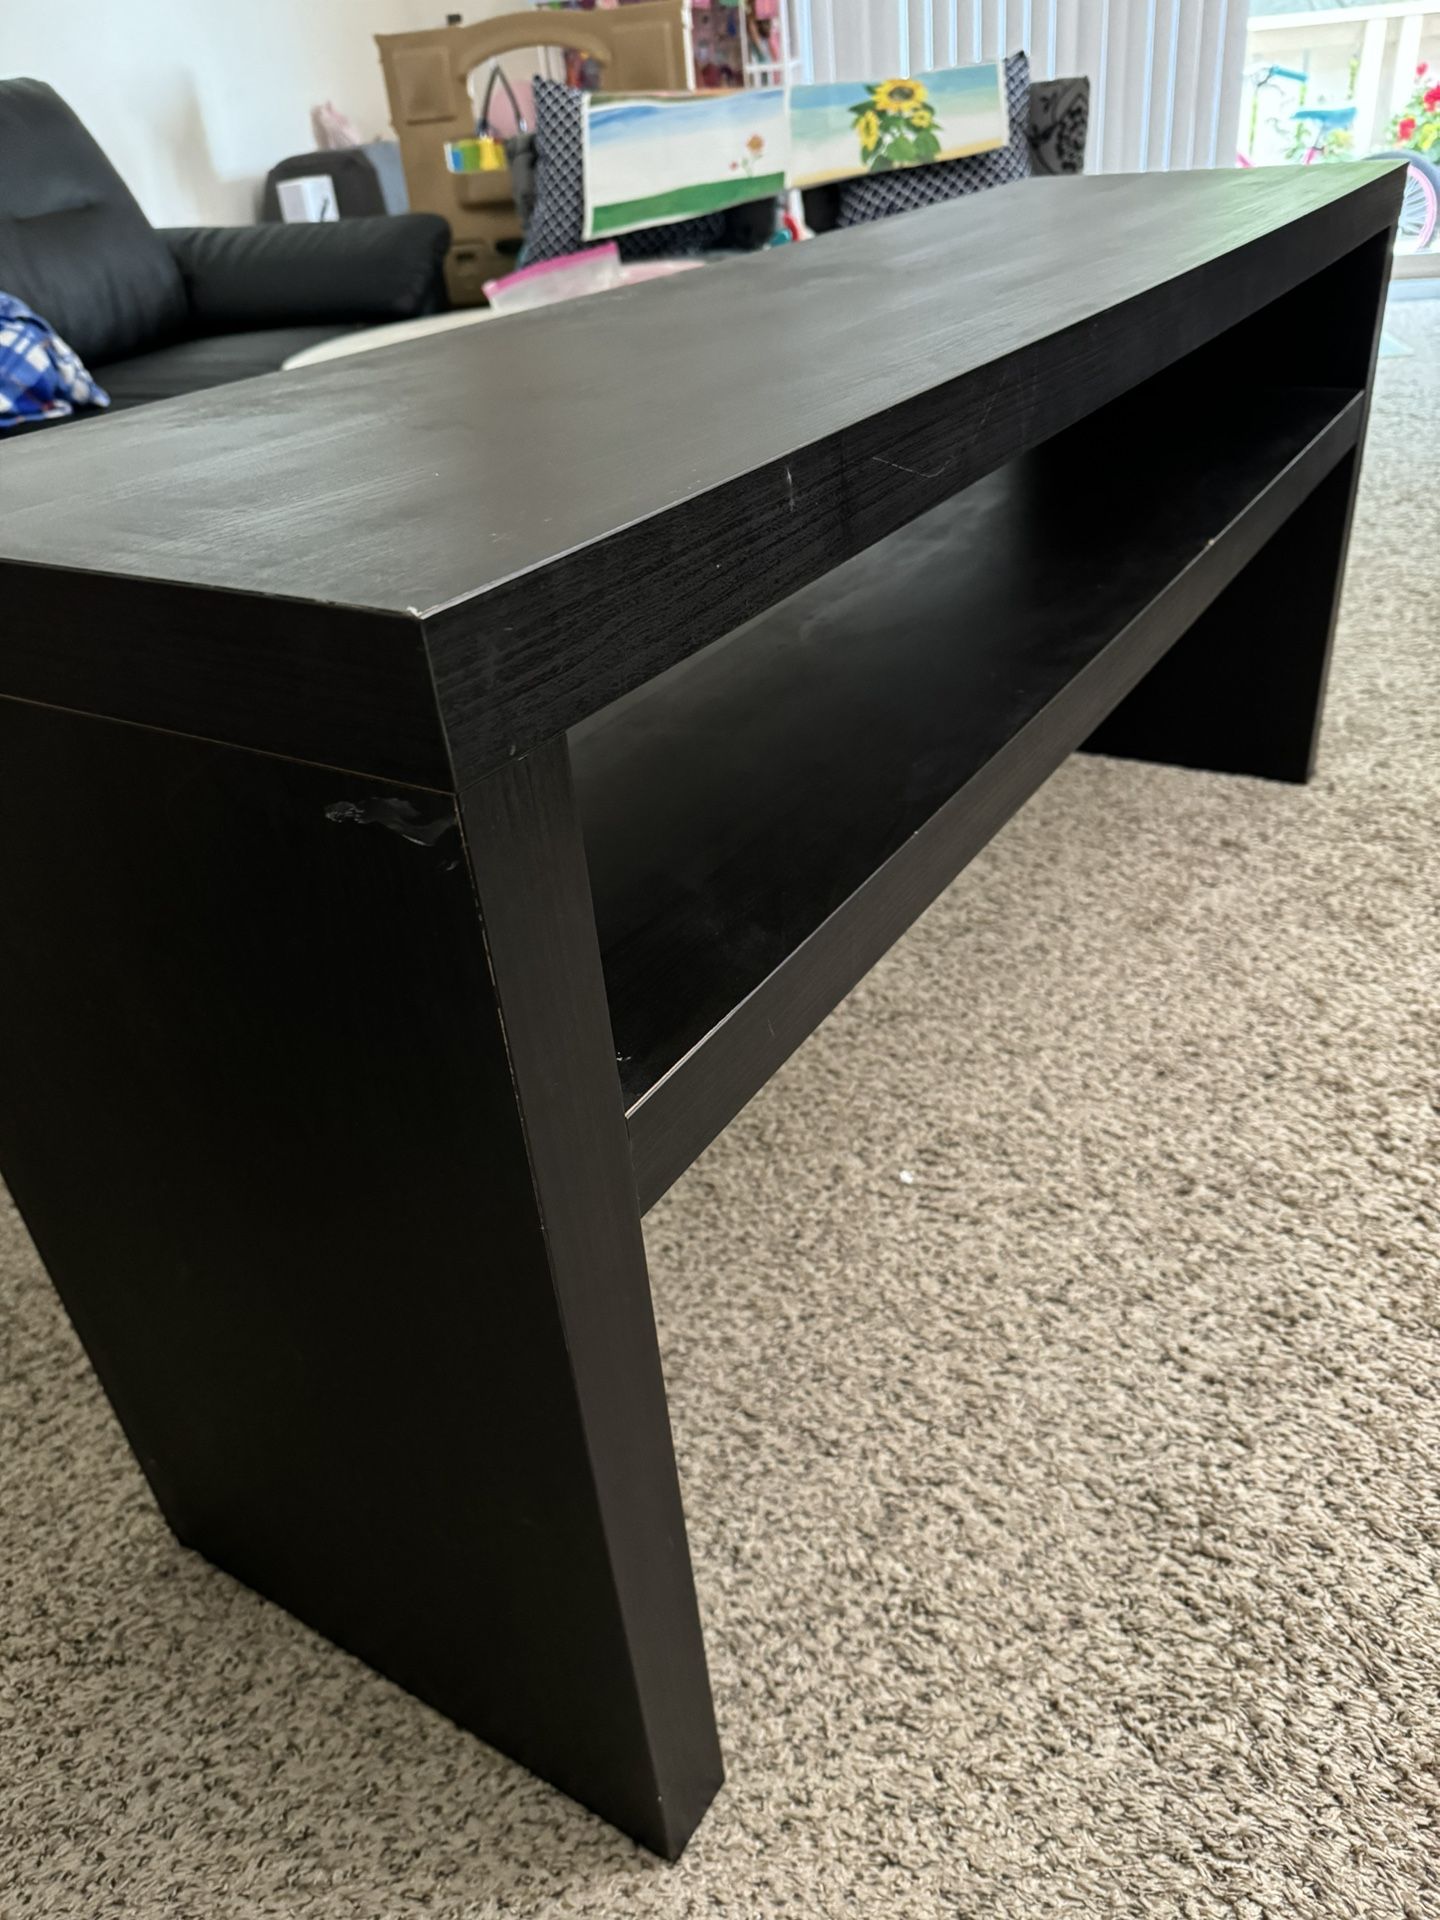 TV Table Console Table.   https://offerup.co/faYXKzQFnY?$deeplink_path=/redirect/